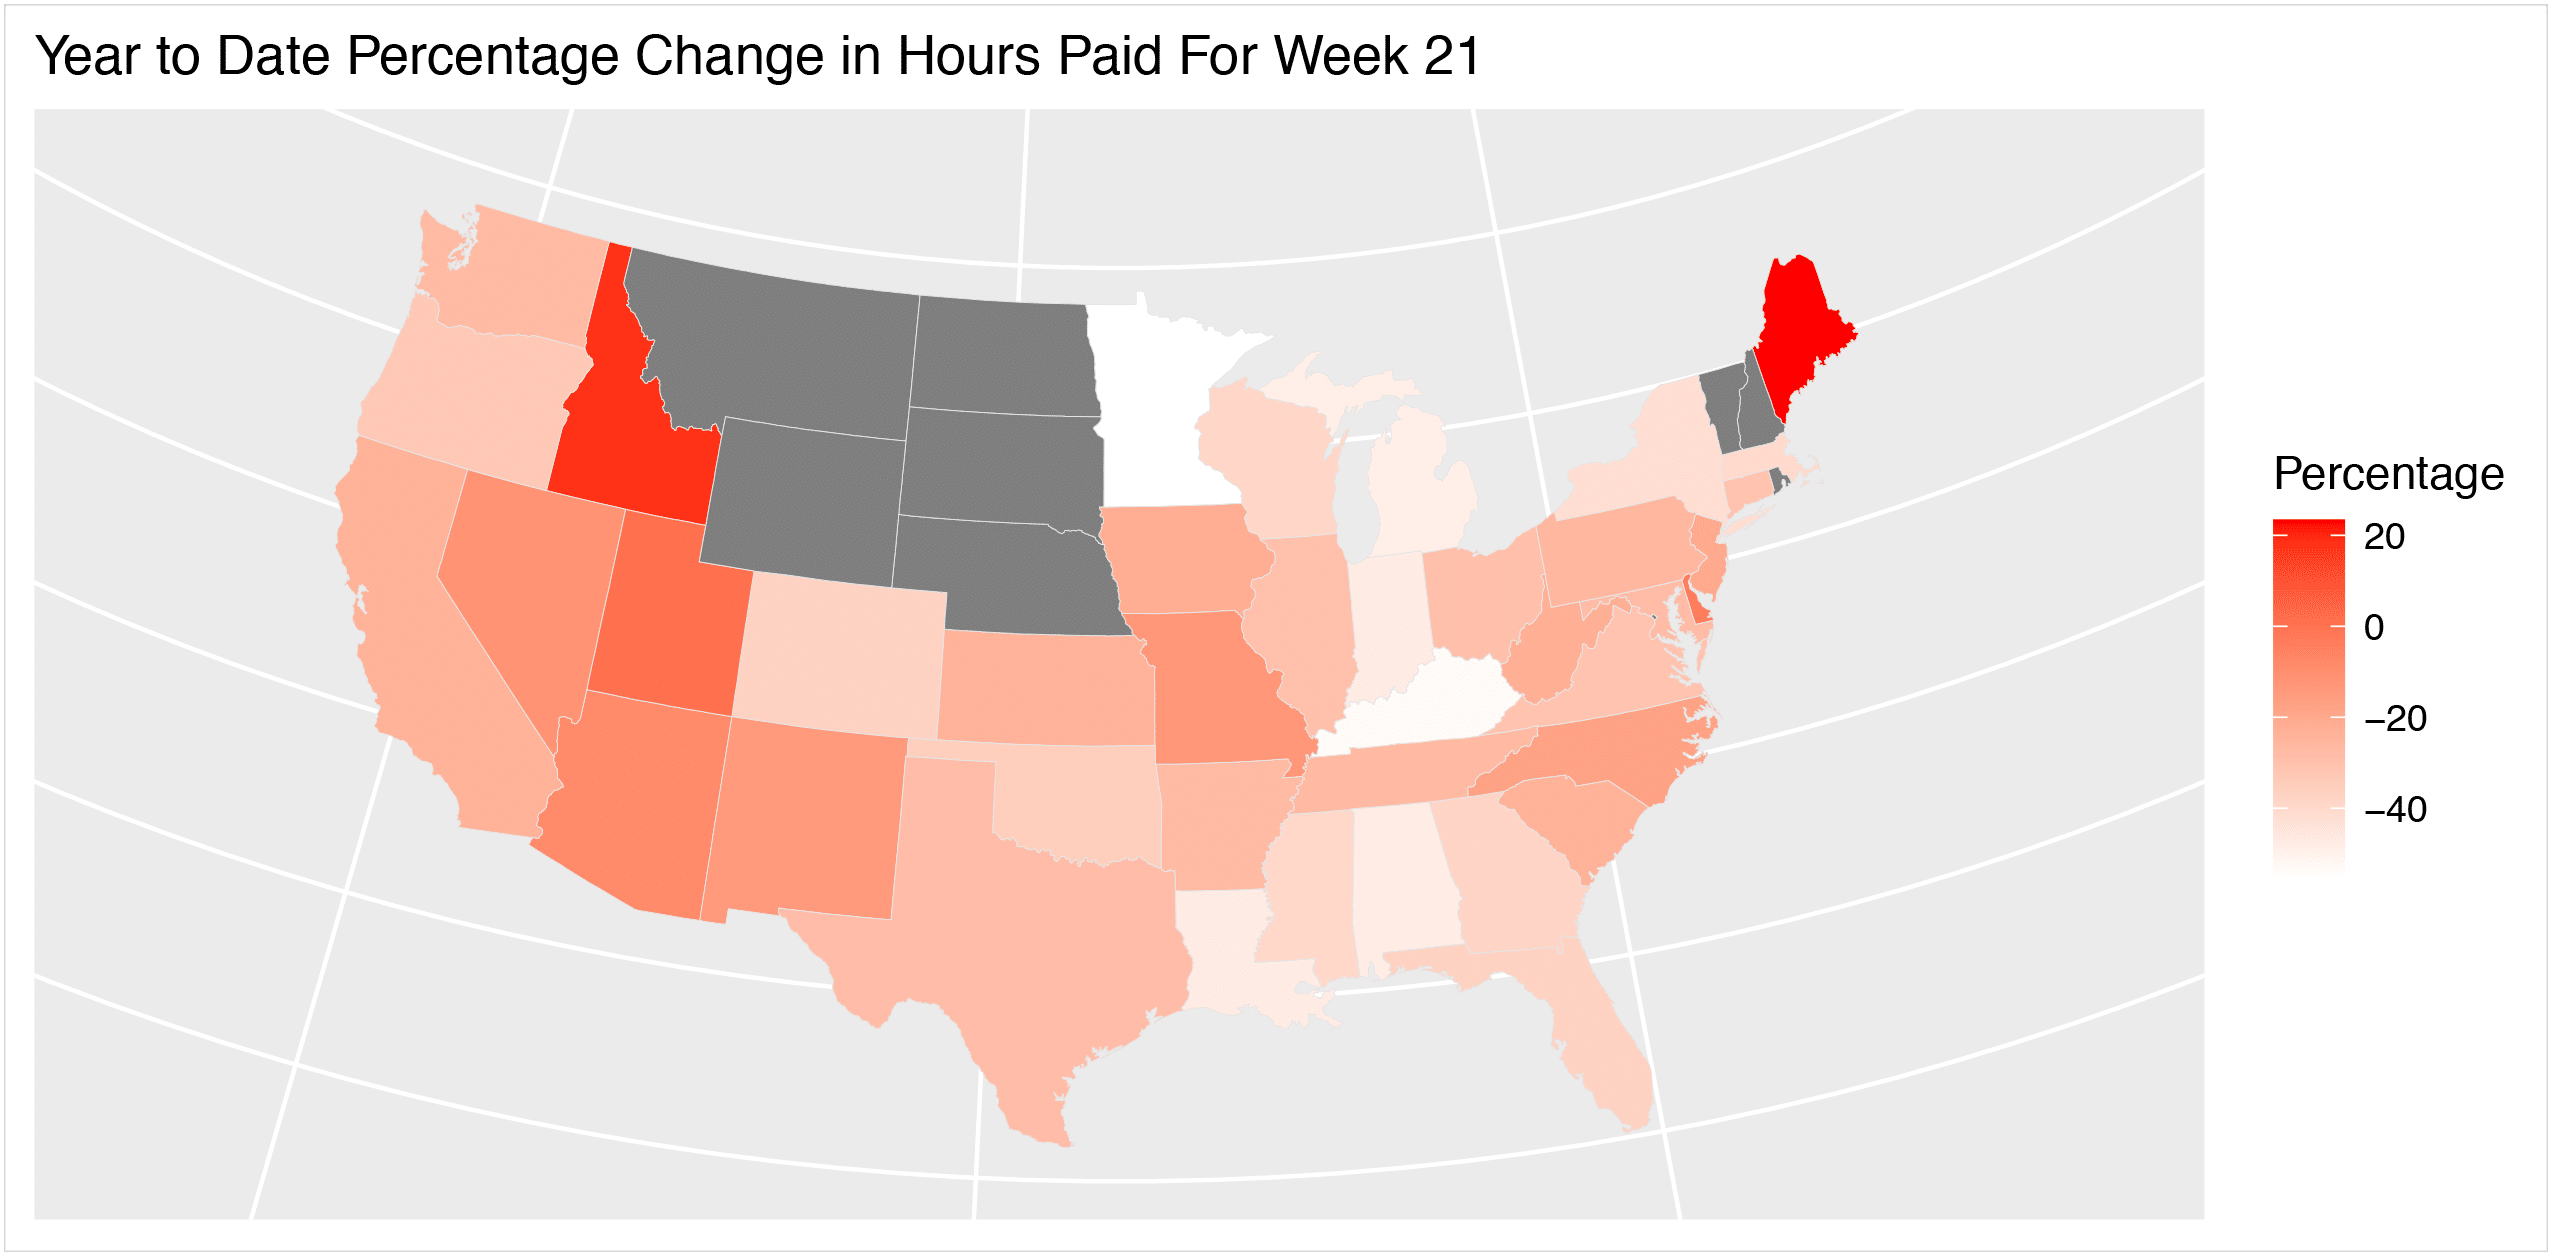 Graph of the year to date percentage change in hours paid for the week